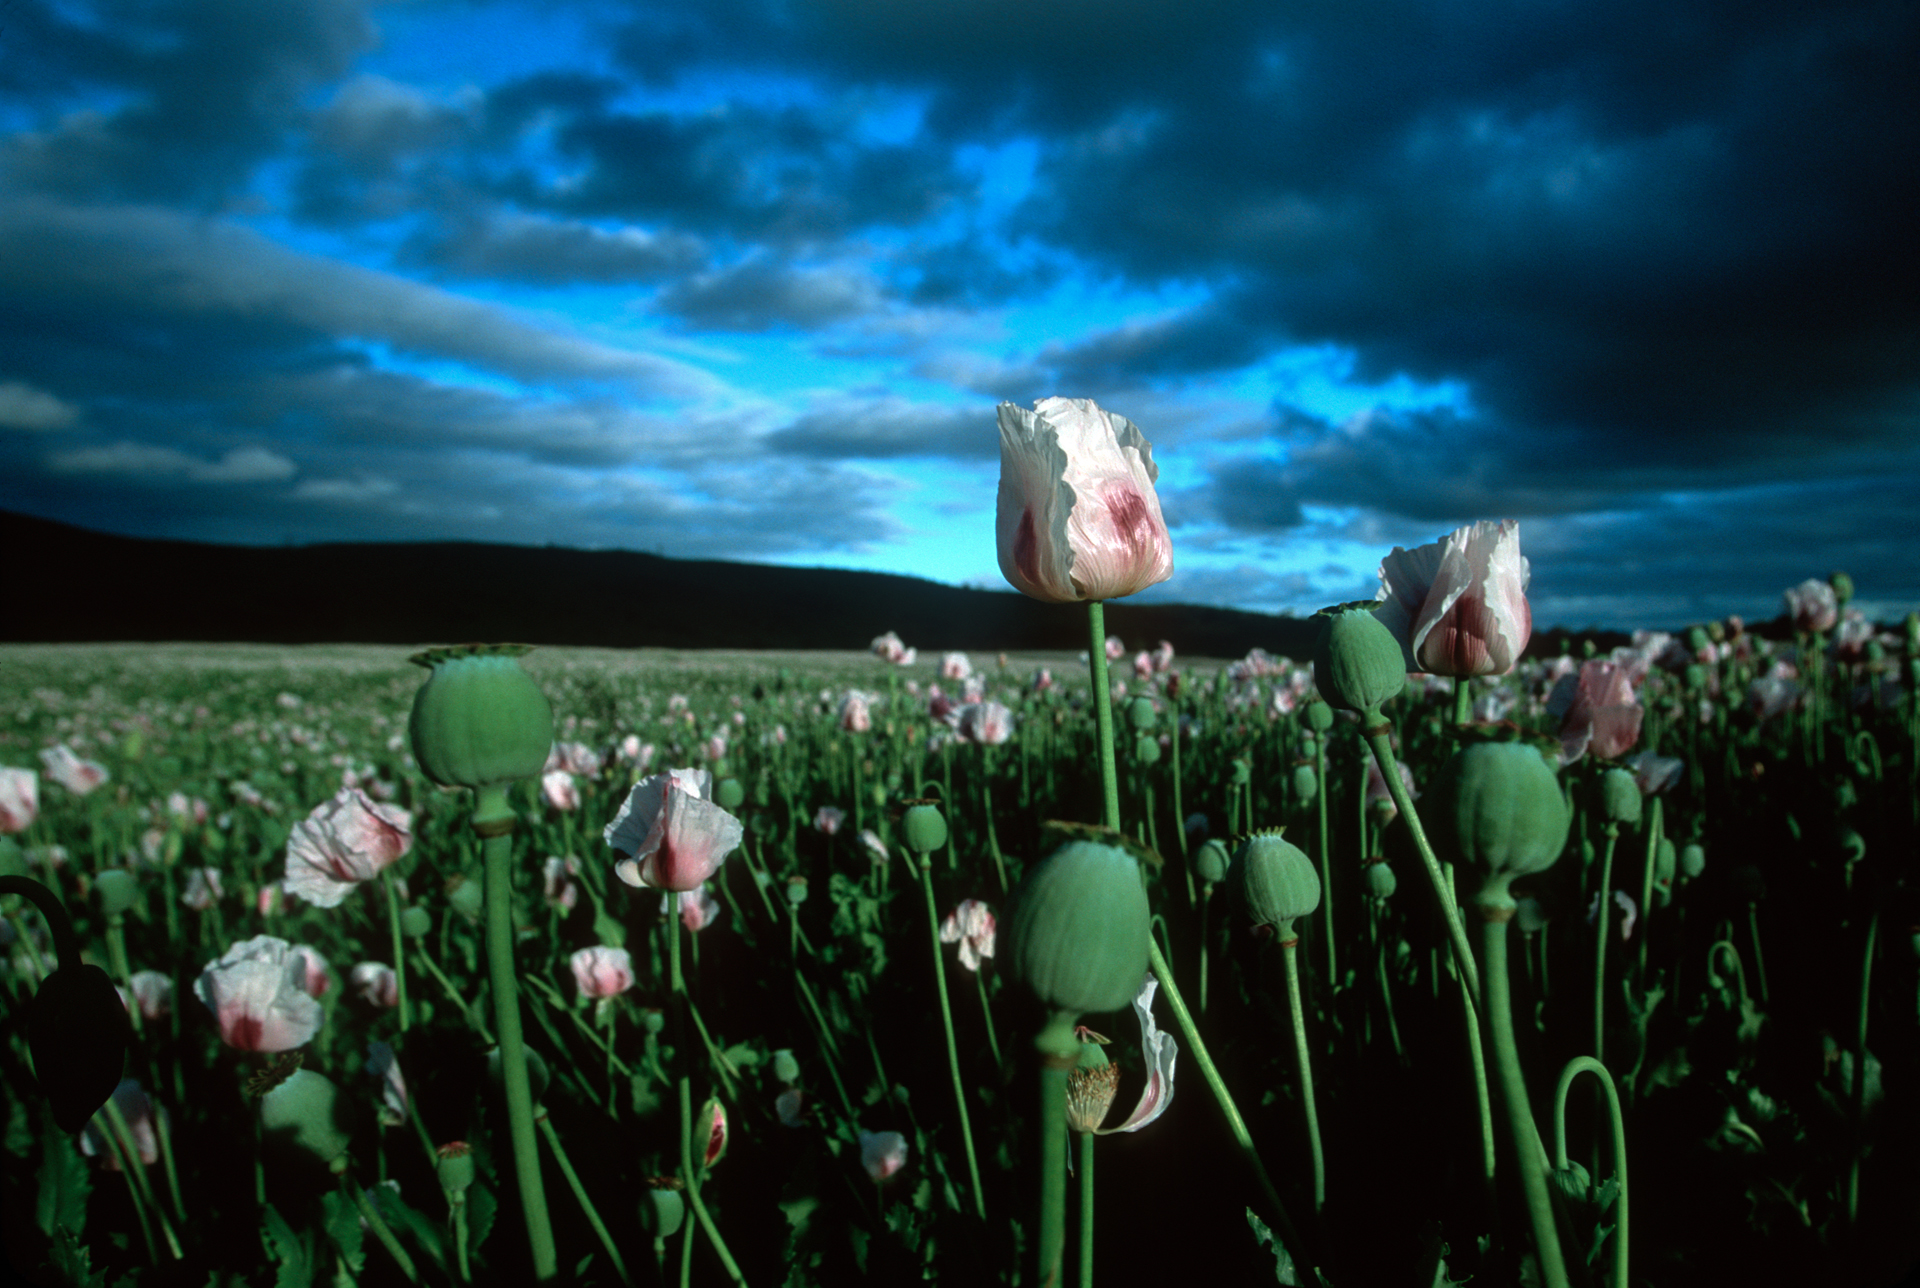  Tasmania grows about 50% of the world's legal crop of poppy seeds for medicinal use.  Richmond  